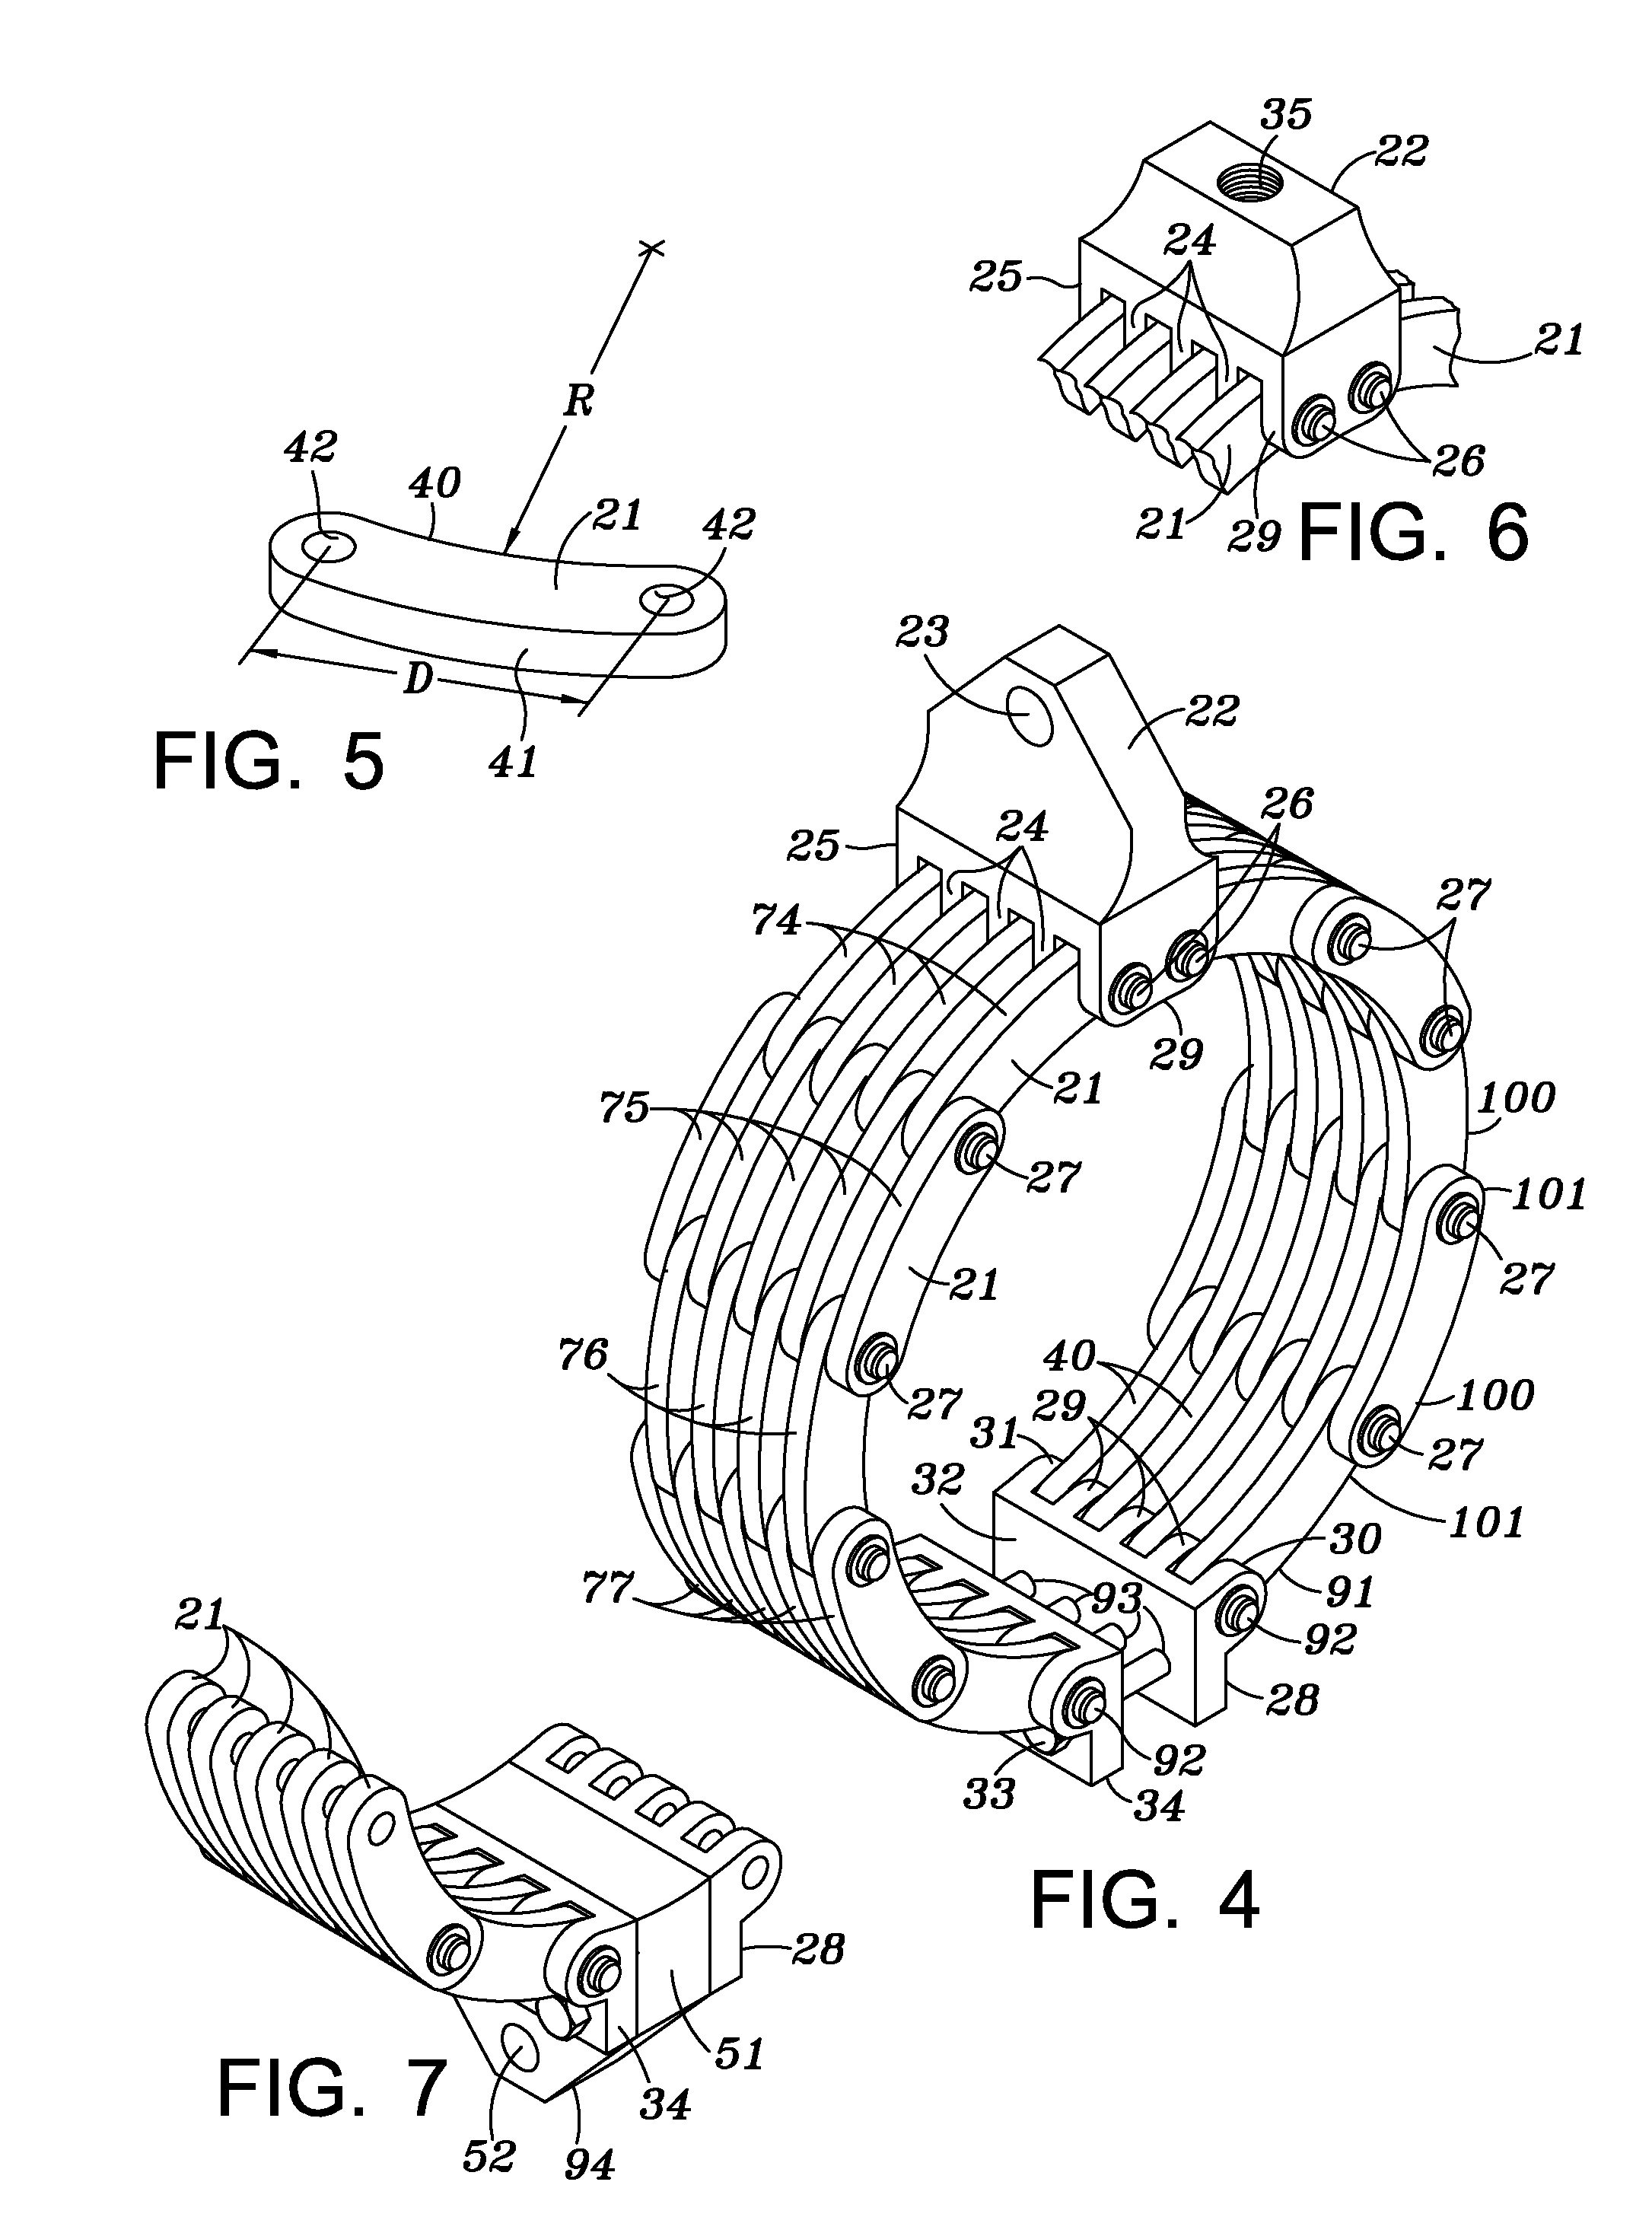 Clamp and hoisting device